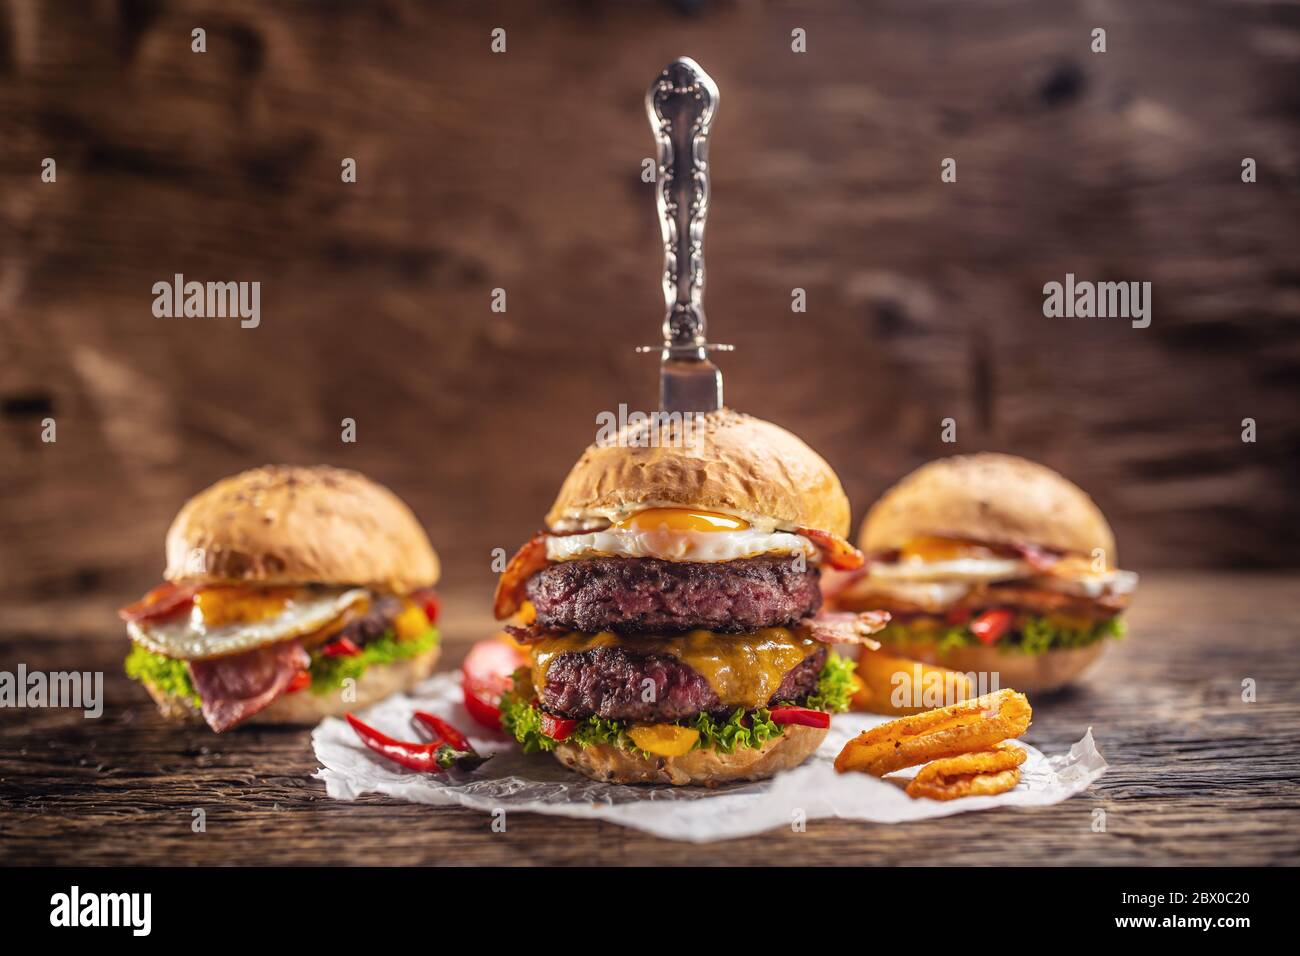 A knife-stabbed double beef burger with chips and chilli, more burgers in the back in a dark environment Stock Photo